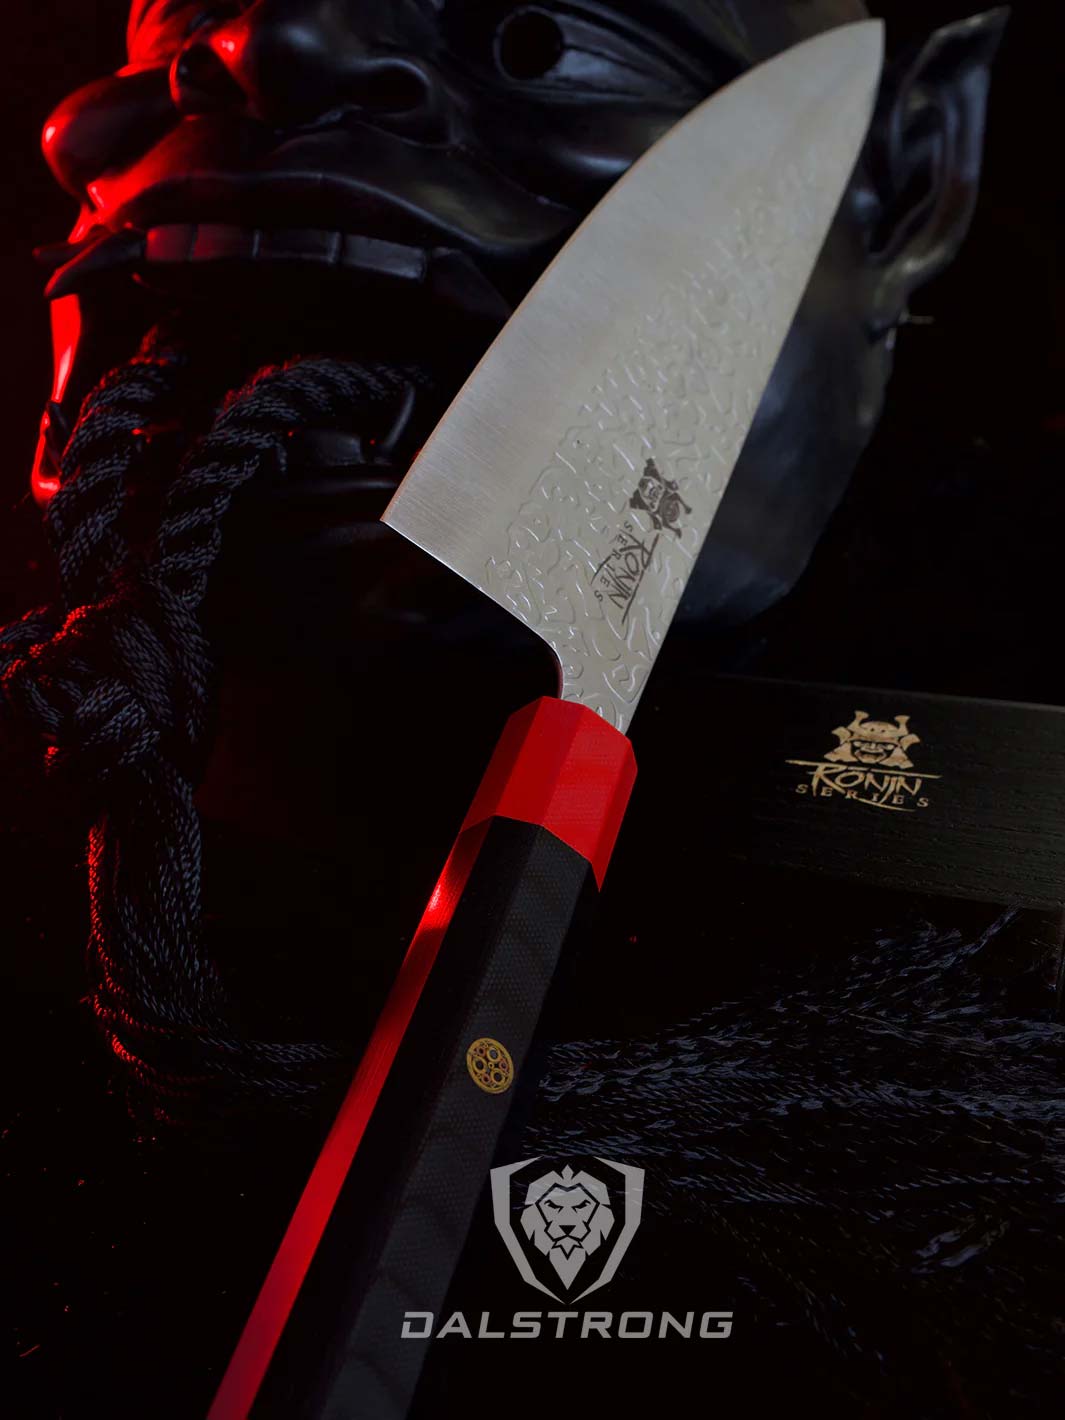 Dalstrong roning series 8 inch chef knife with black handle and sheath beside a samurai mask.